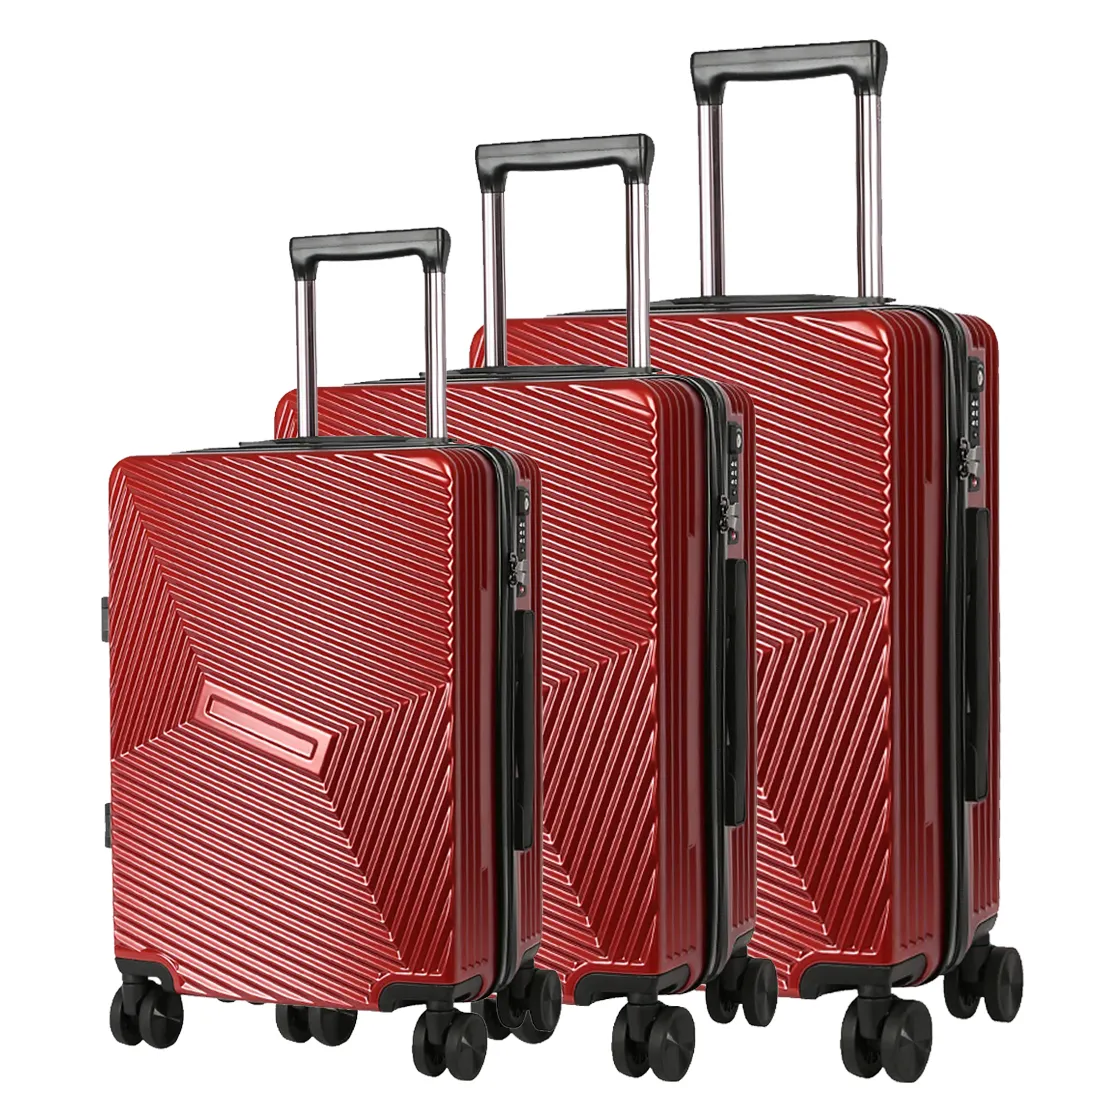 Hot Sale Travelling Bags Luggage Geometric pattern ABS Trolley Luggage 20"24" 2 PCS custom suitcase case Carry On Suitcase Sets